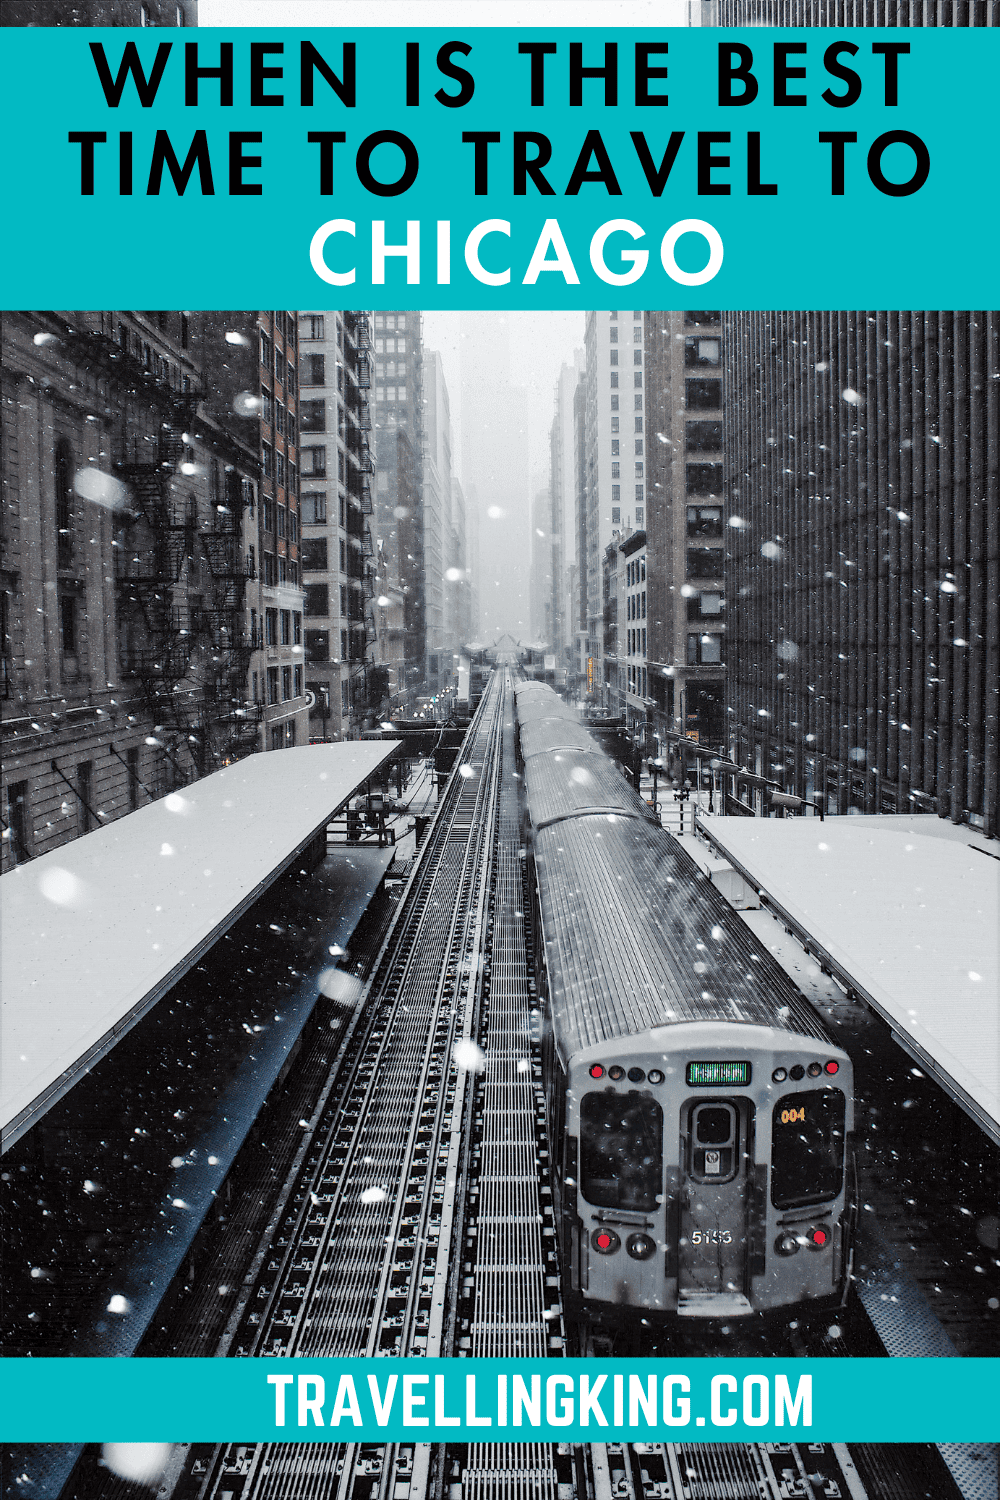 When is the Best Time to Travel to Chicago